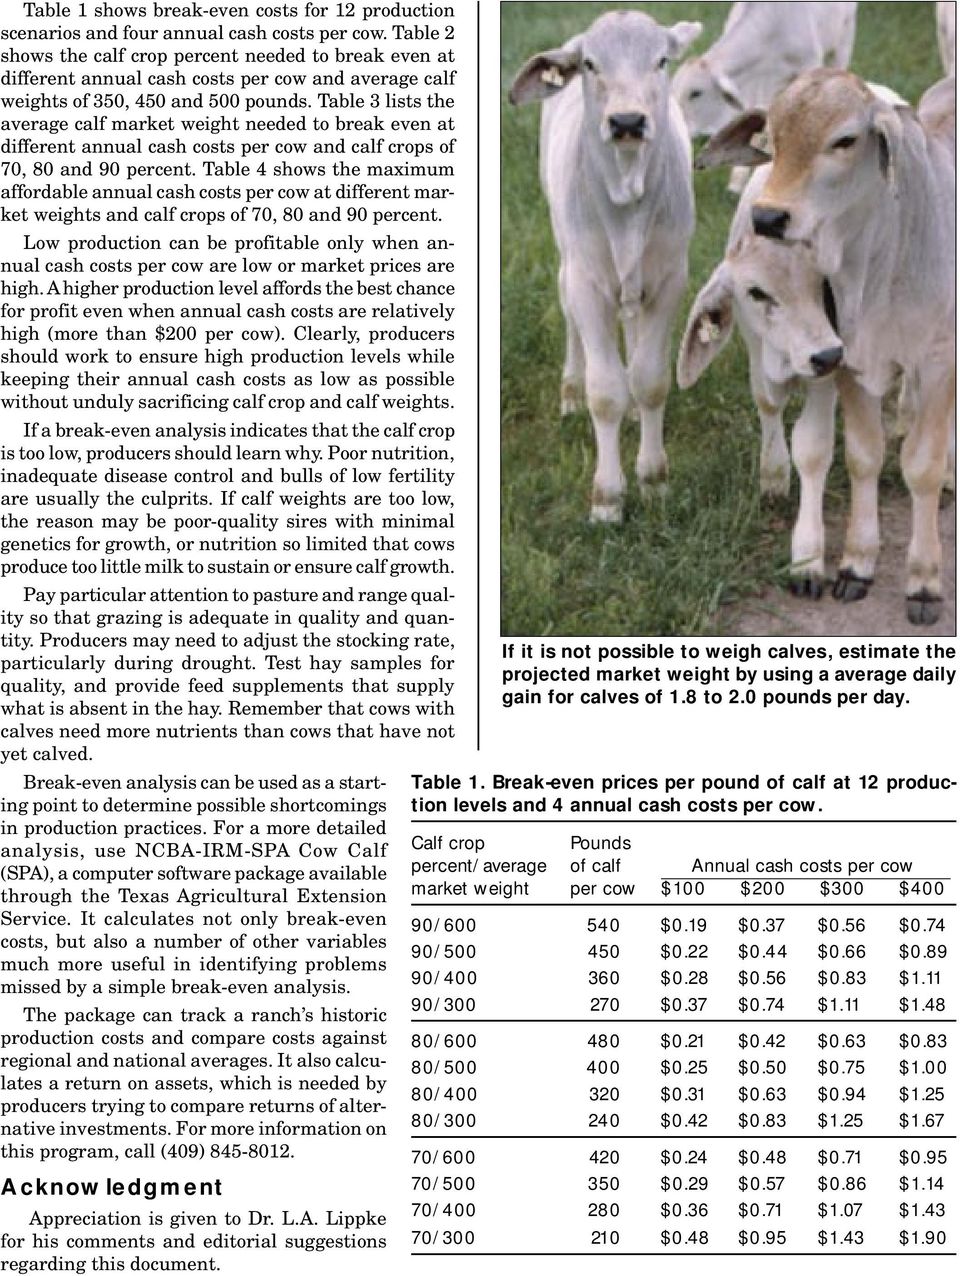 Table 3 lists the average calf market weight needed to break even at different annual cash costs per cow and calf crops of 70, 80 and 90 percent.